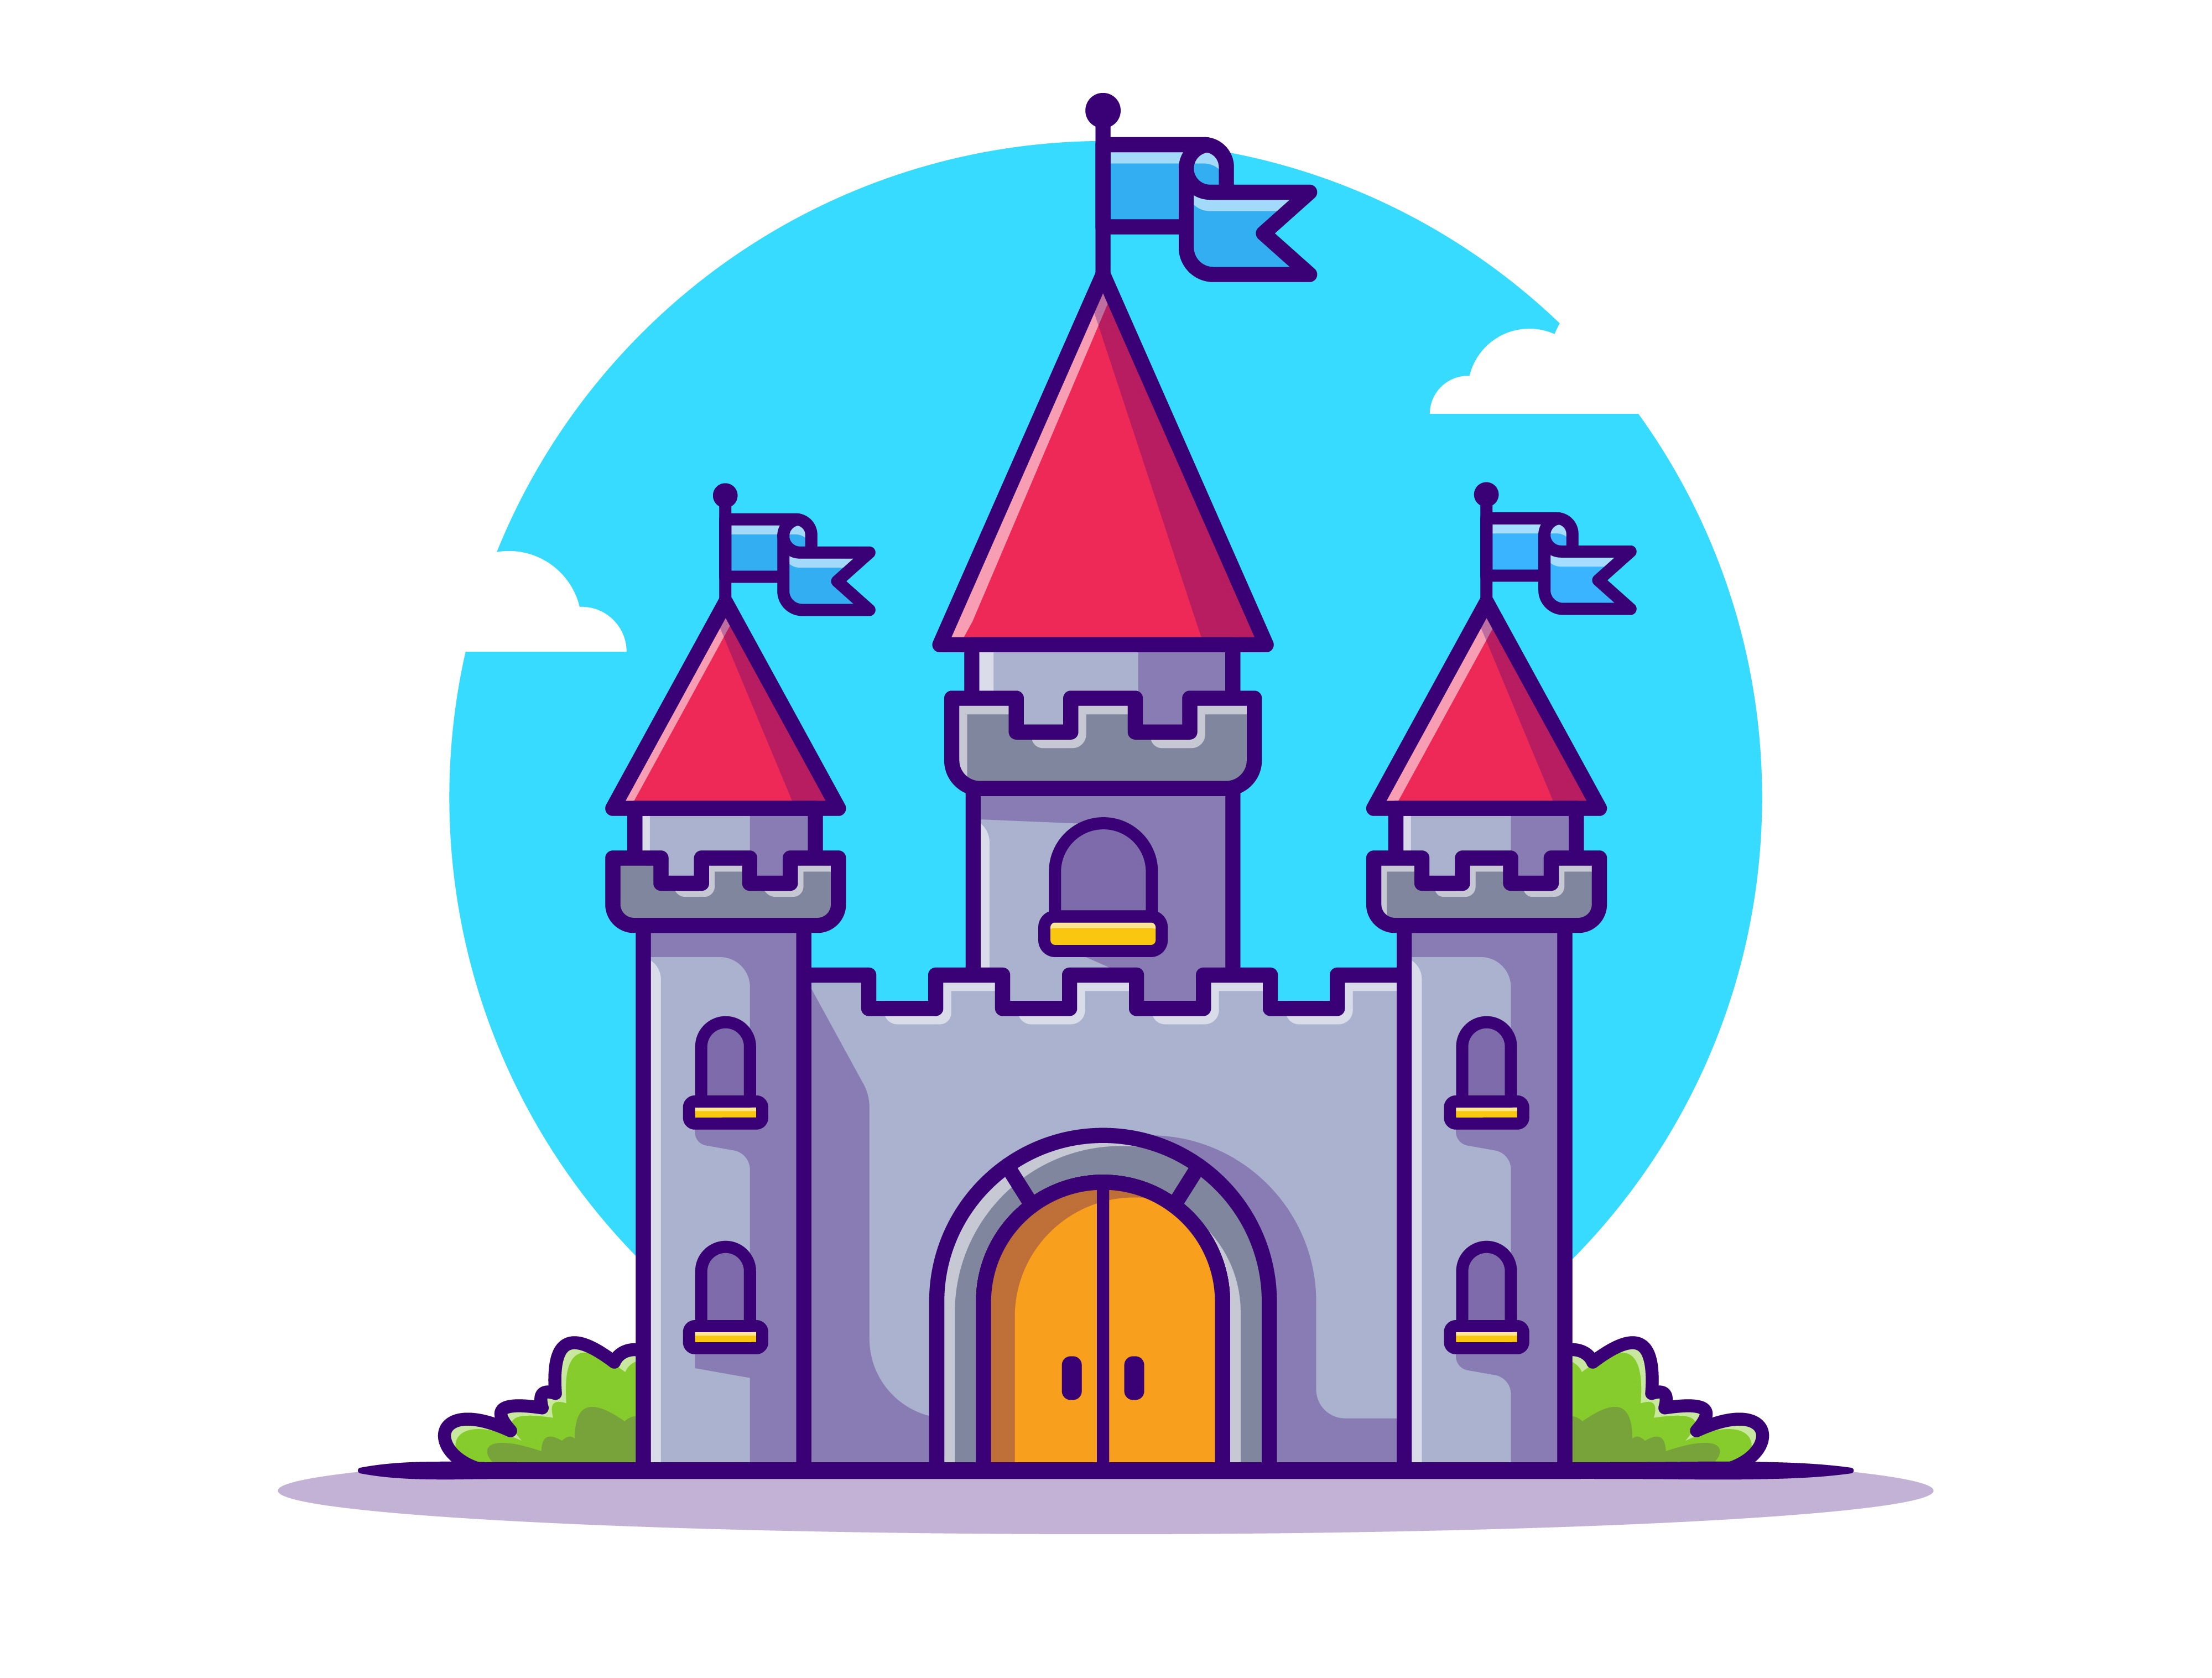 https://www.freepik.com/free-vector/castle-palace-cartoon-icon-illustration_10340625.htm#query=fortress&position=37&from_view=search&track=robertav1_2_sidr